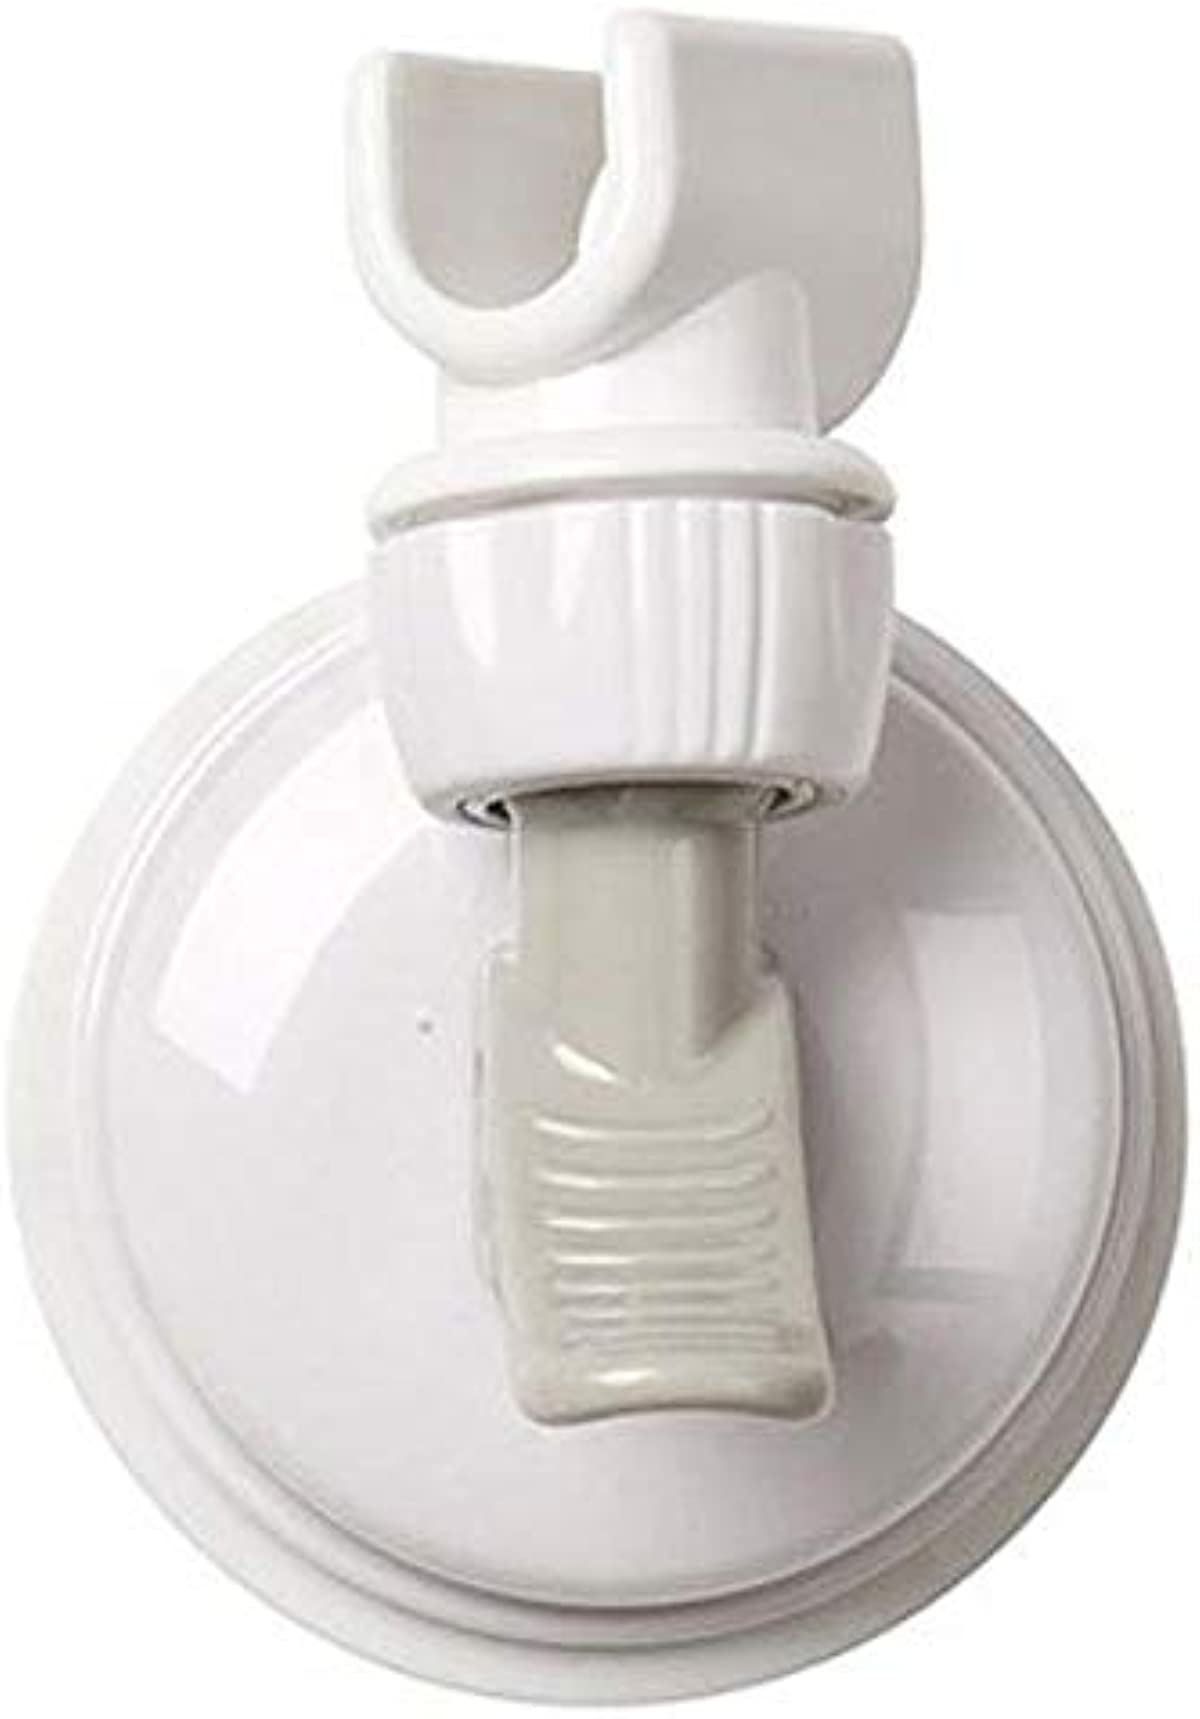 Changing Lifestyles Safe-er-Grip Portable Shower Arm, Contrasted White with gray accents